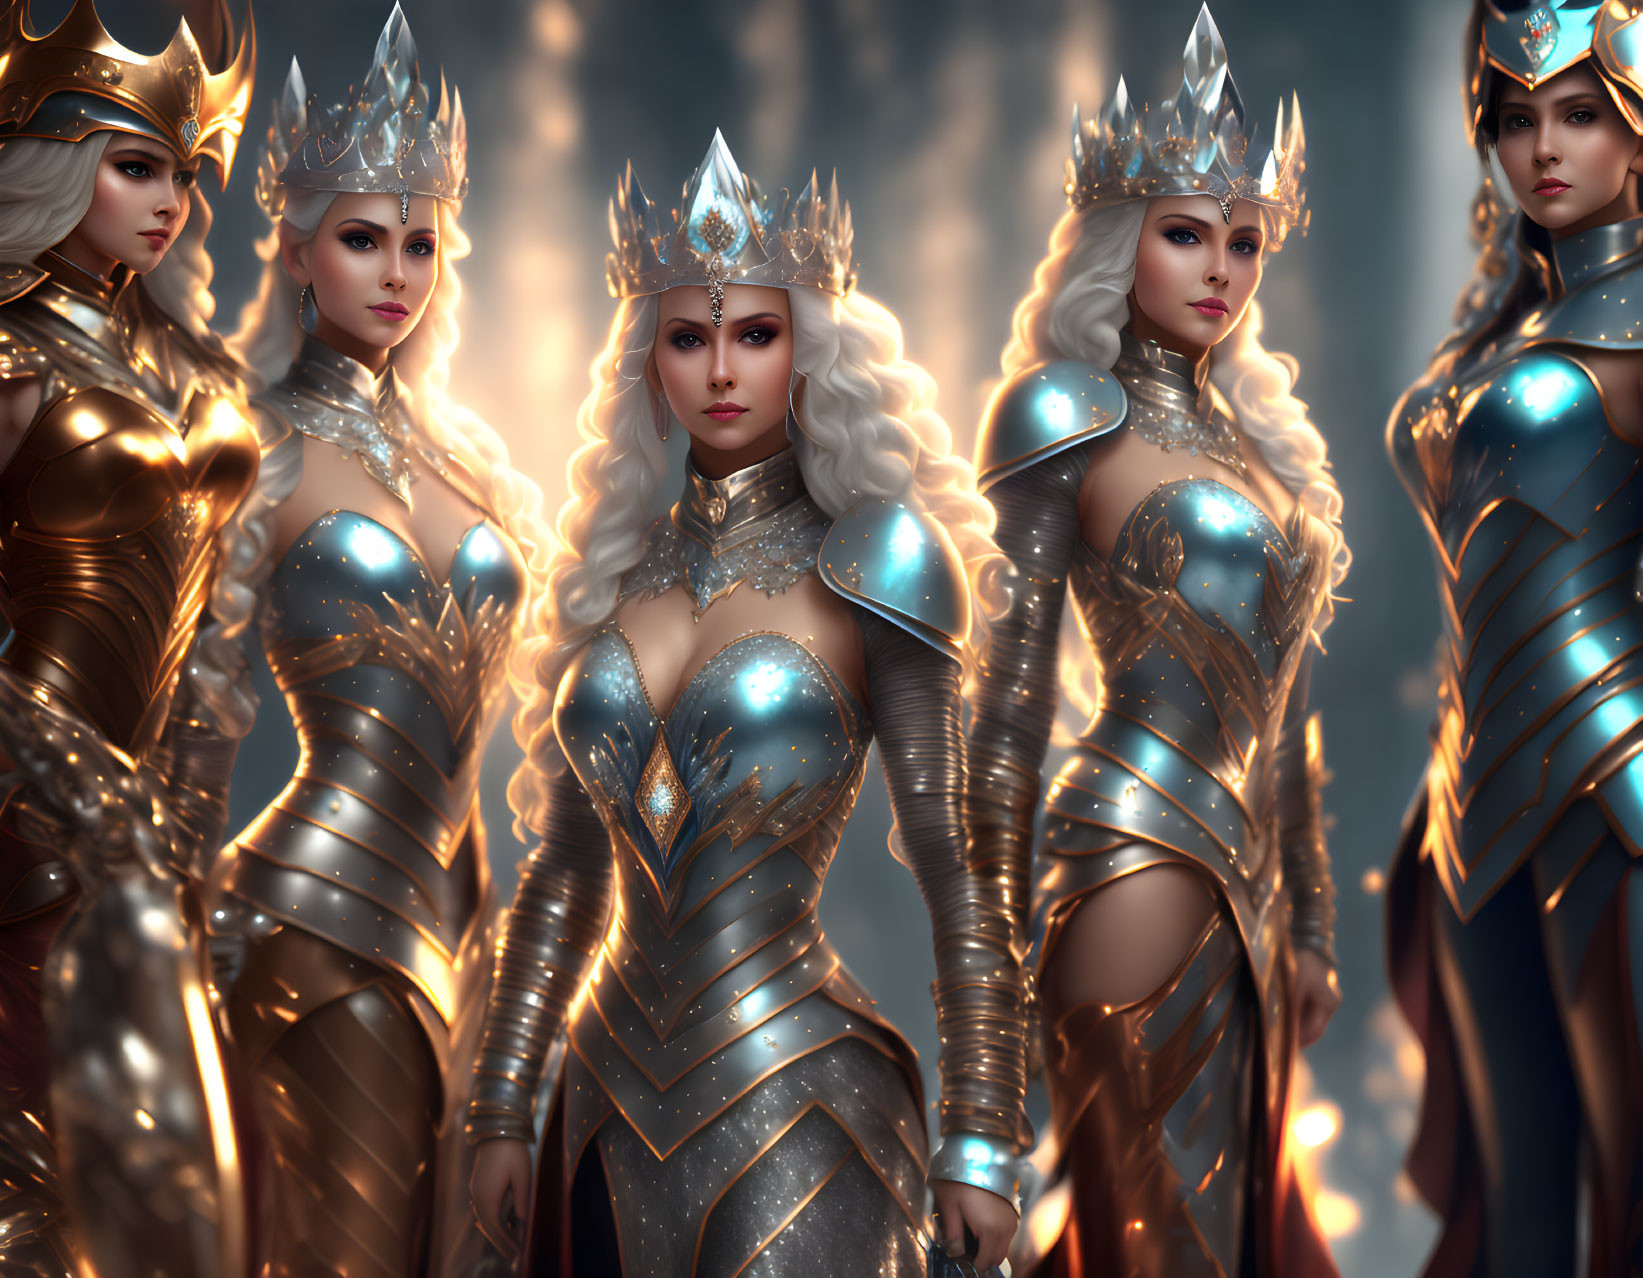 Five Female Warriors in Elaborate Fantasy Armor and Crowns Standing Resolute